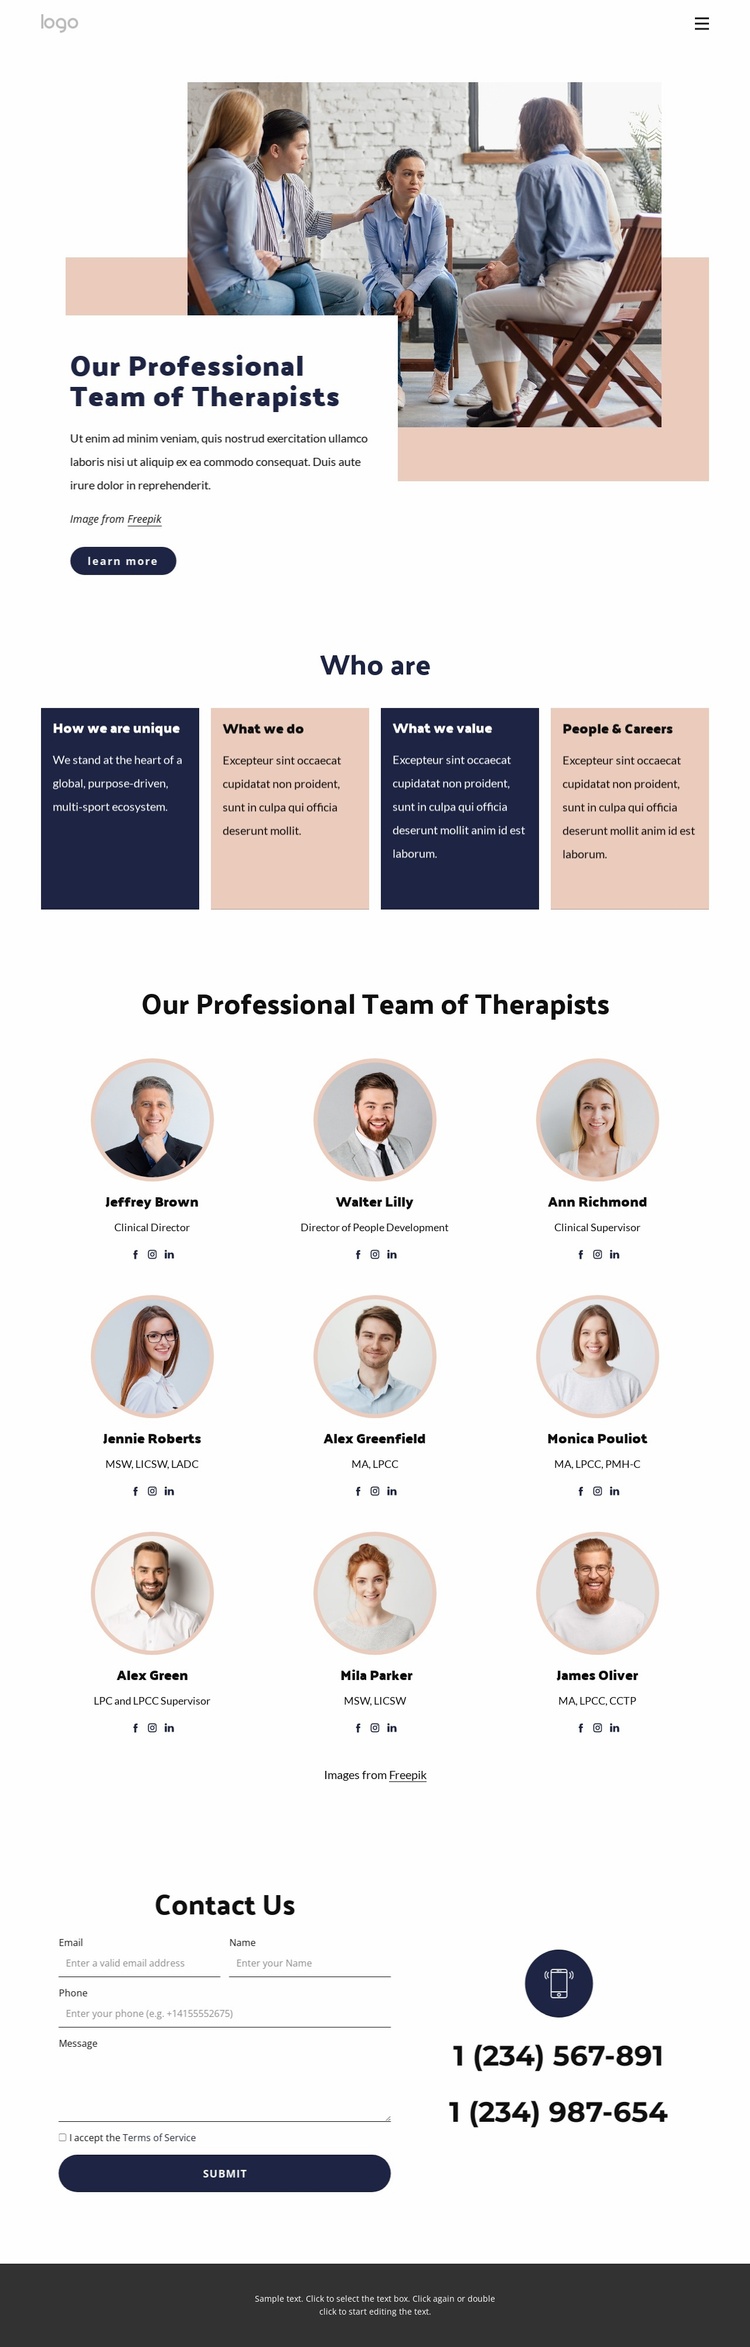 Our professional team of therapists Landing Page